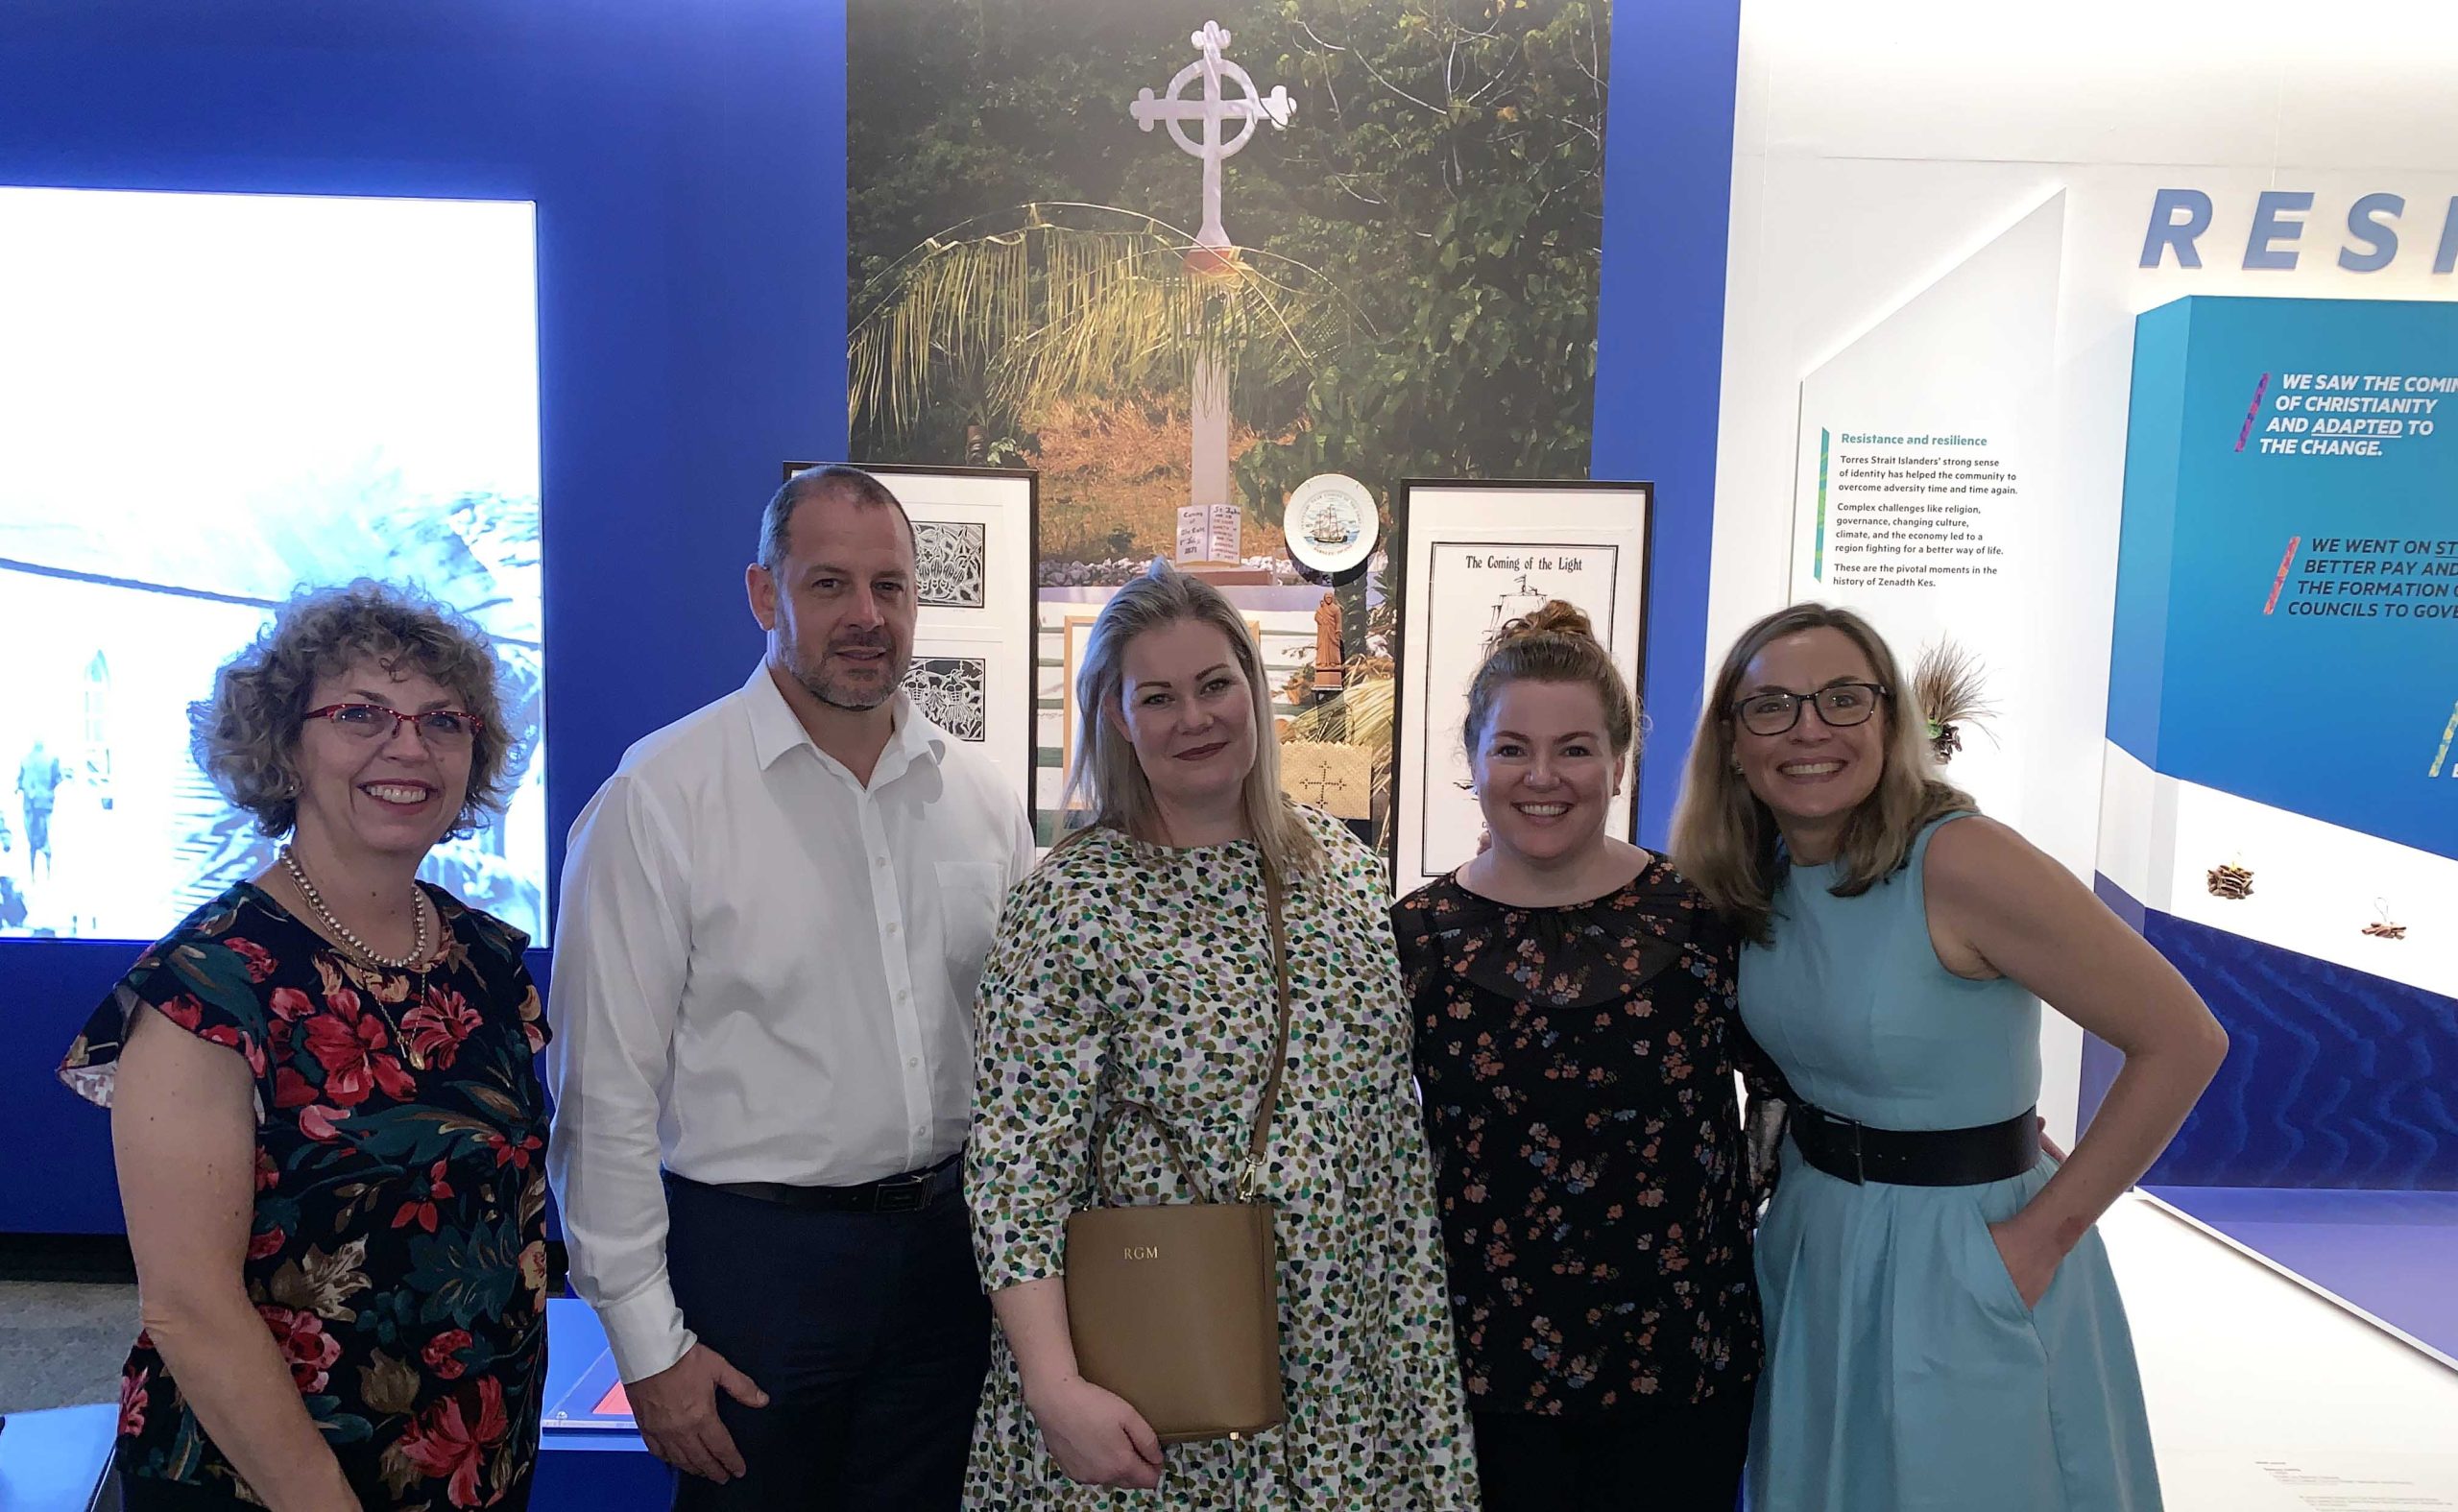 Stephen Harrison, Belinda Macarthur, Joanne Rose, Rebecca McLean and Michelle McDonald from the Parishes and Other Mission Agencies Commission (PMC) visited the Island Futures exhibition at the Queensland Museum on 25 November 2021